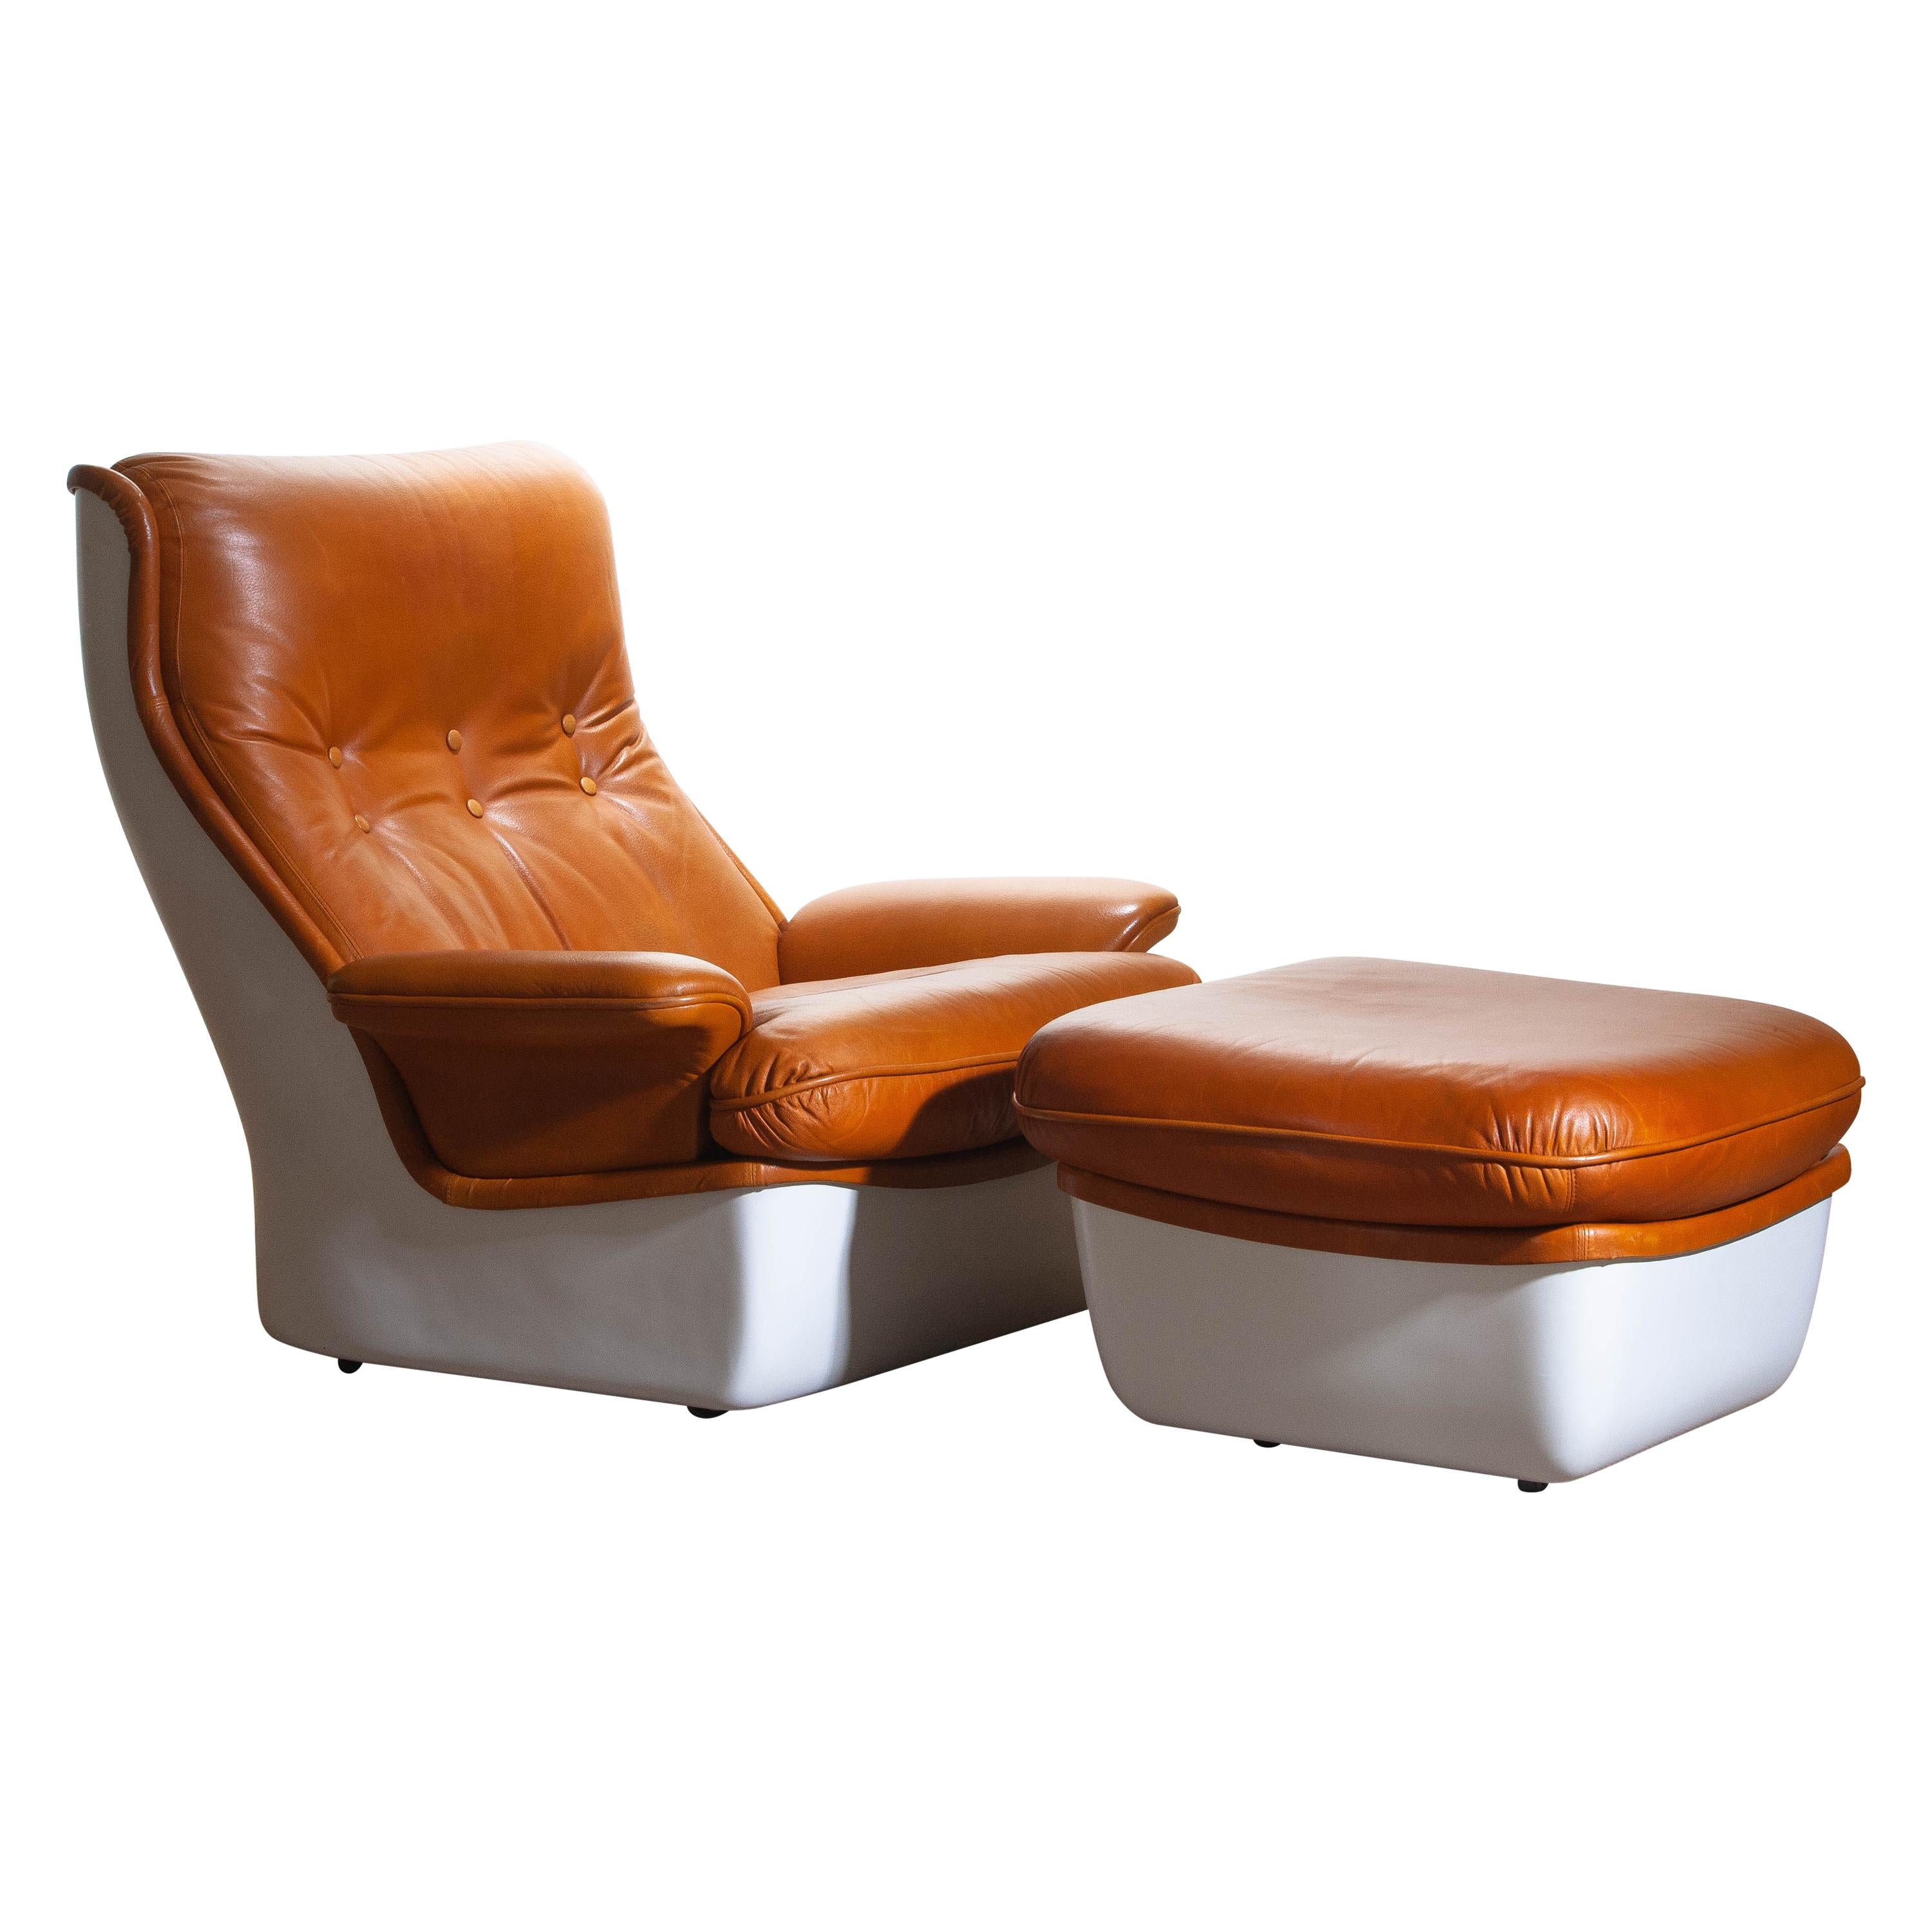 Space Age 1970s, Marc Held Airborne Lounge / Easy Chair and Ottoman in Cognac Leather